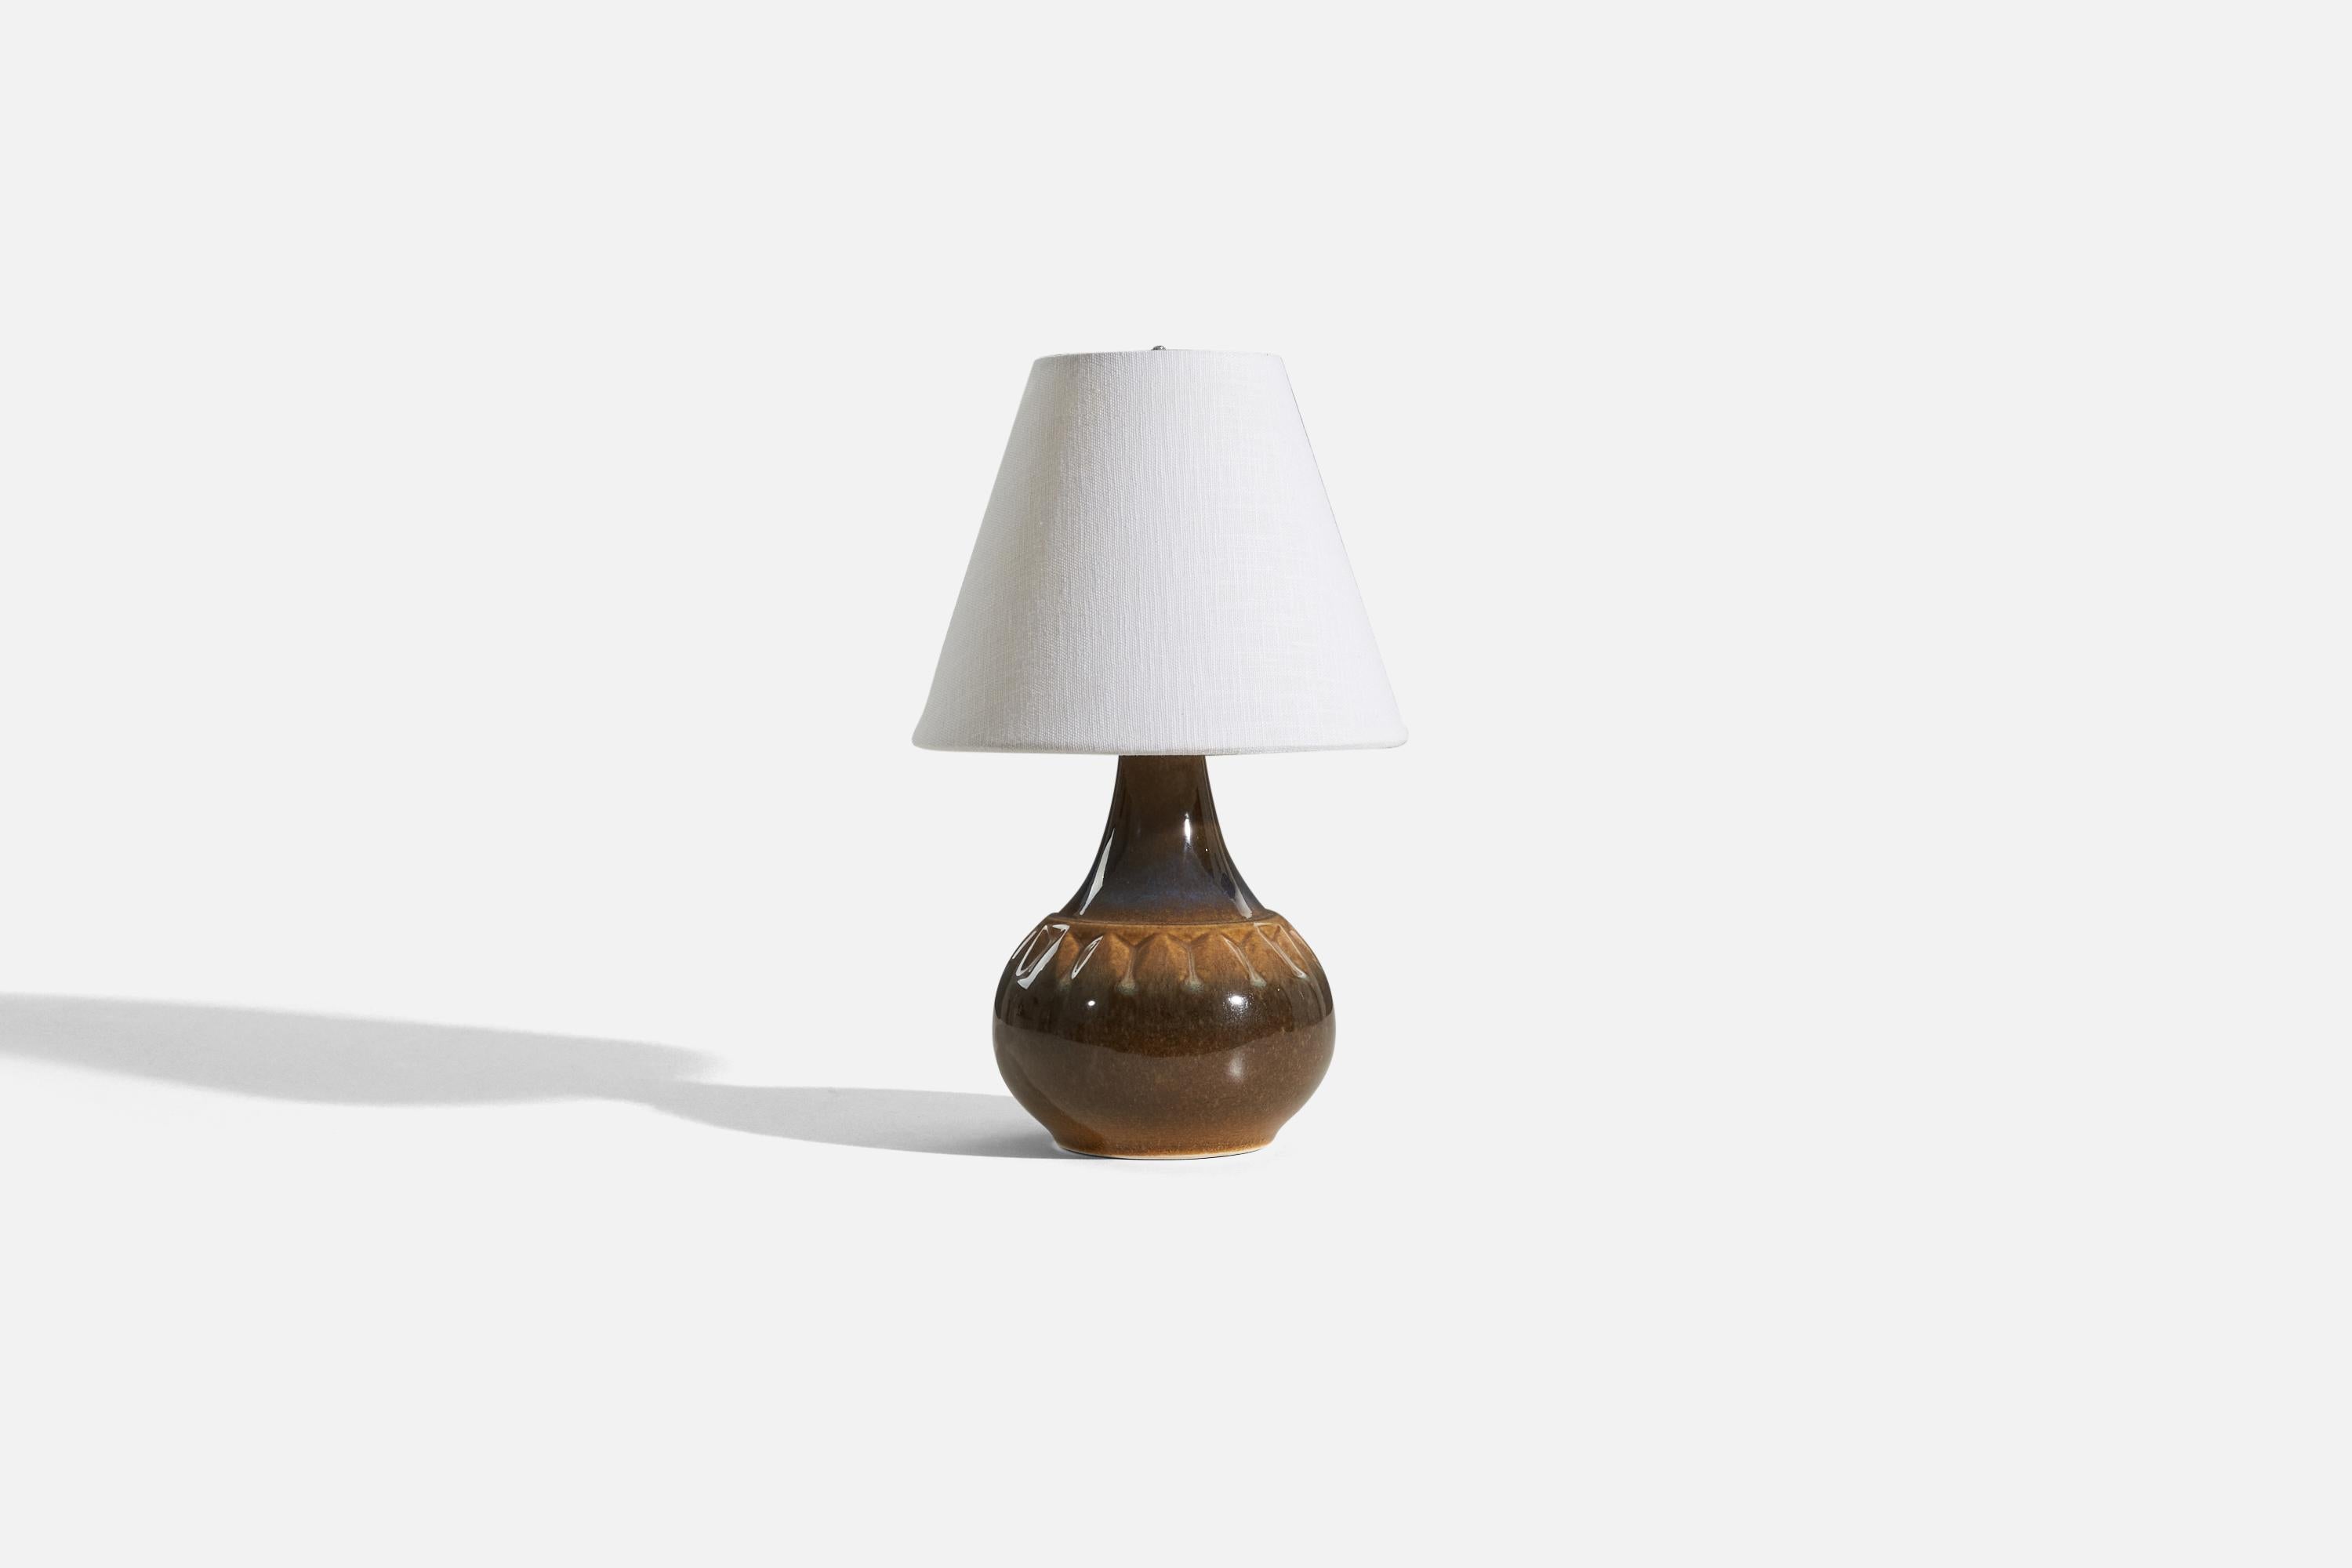 A brown-glazed stoneware table lamp, designed and produced by Søholm Stentøj, Denmark, 1970s.

Sold without lampshade. 
Dimensions of Lamp (inches) : 9.375 x 5.5 x 5.5 (H x W x D)
Dimensions of Shade (inches) : 4 x 8 x 6.5 (T x B x H)
Dimension